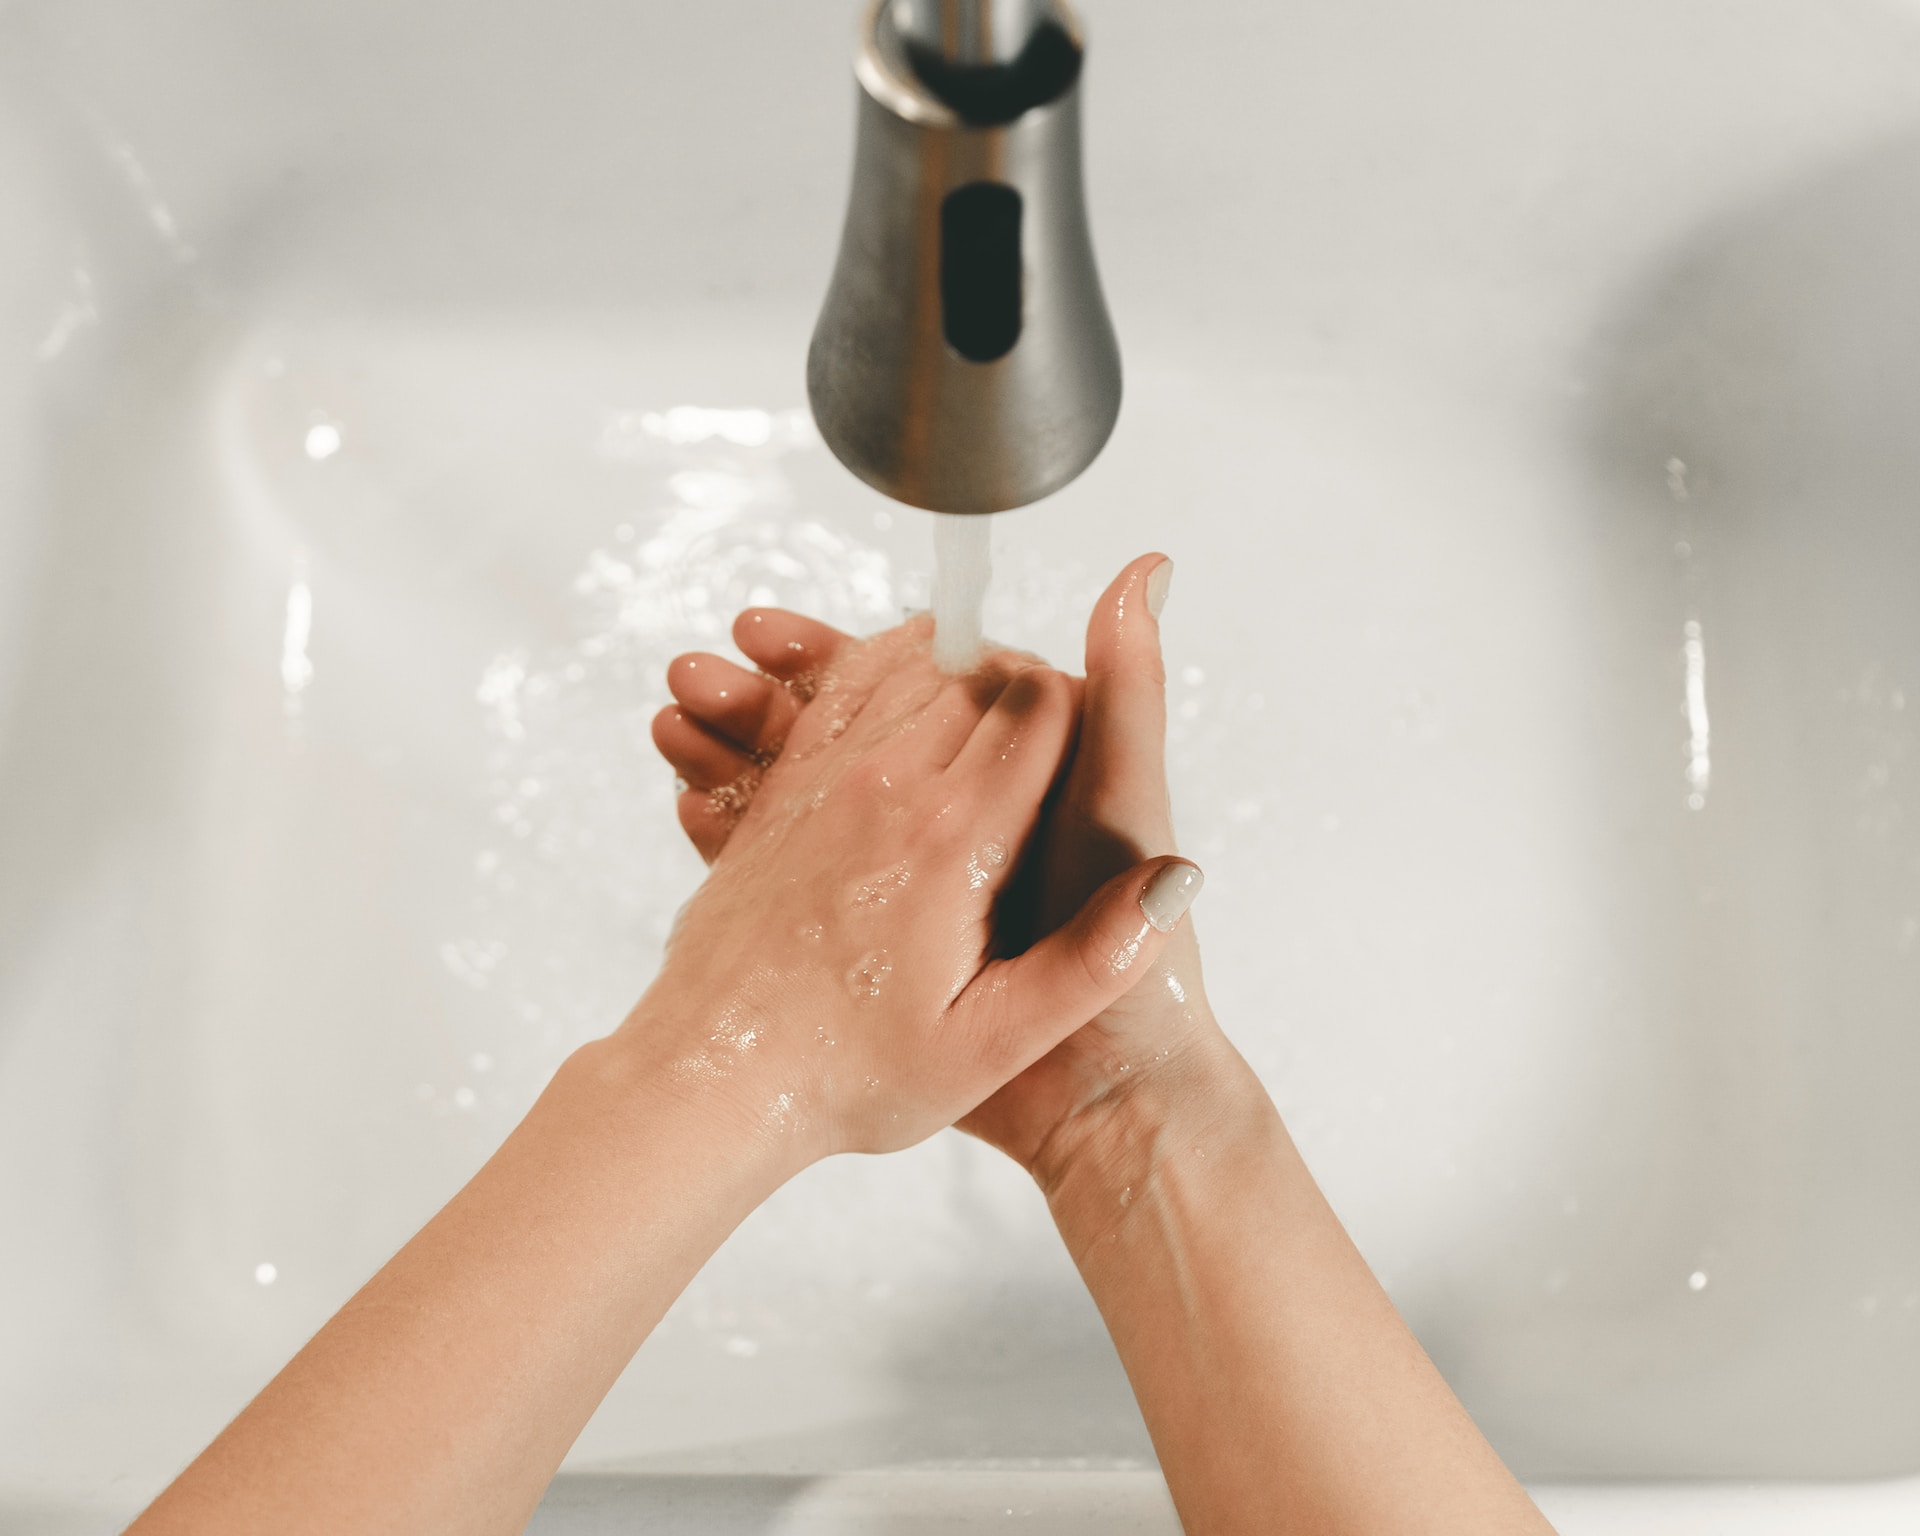 Hands being washed over a white sink with clear water running out of a metal faucet.